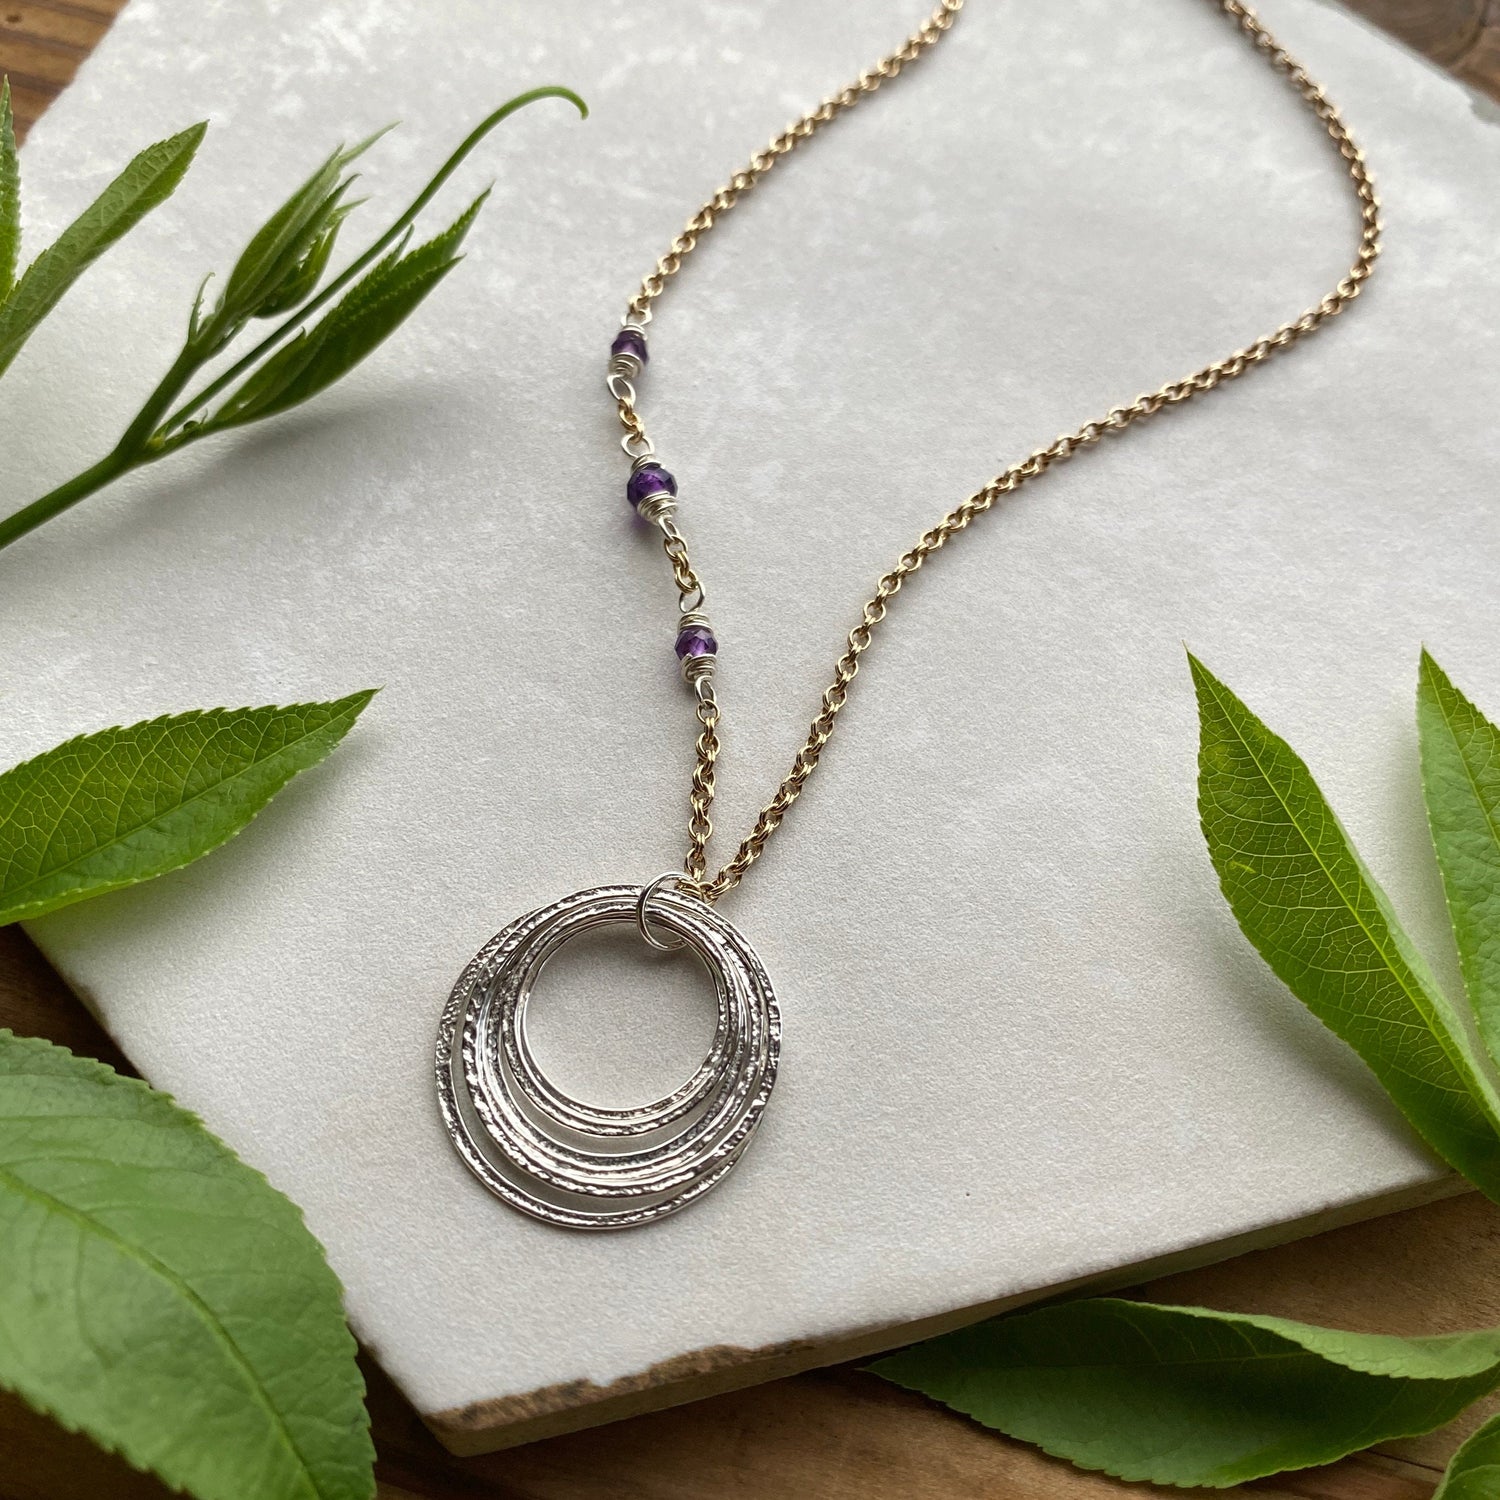 6 Circle 60th Mixed Metal Minimalist Milestone Birthday Necklace with Birthstones, 6 Rings for 6 Decades Silver Six Circles Pendant on Gold